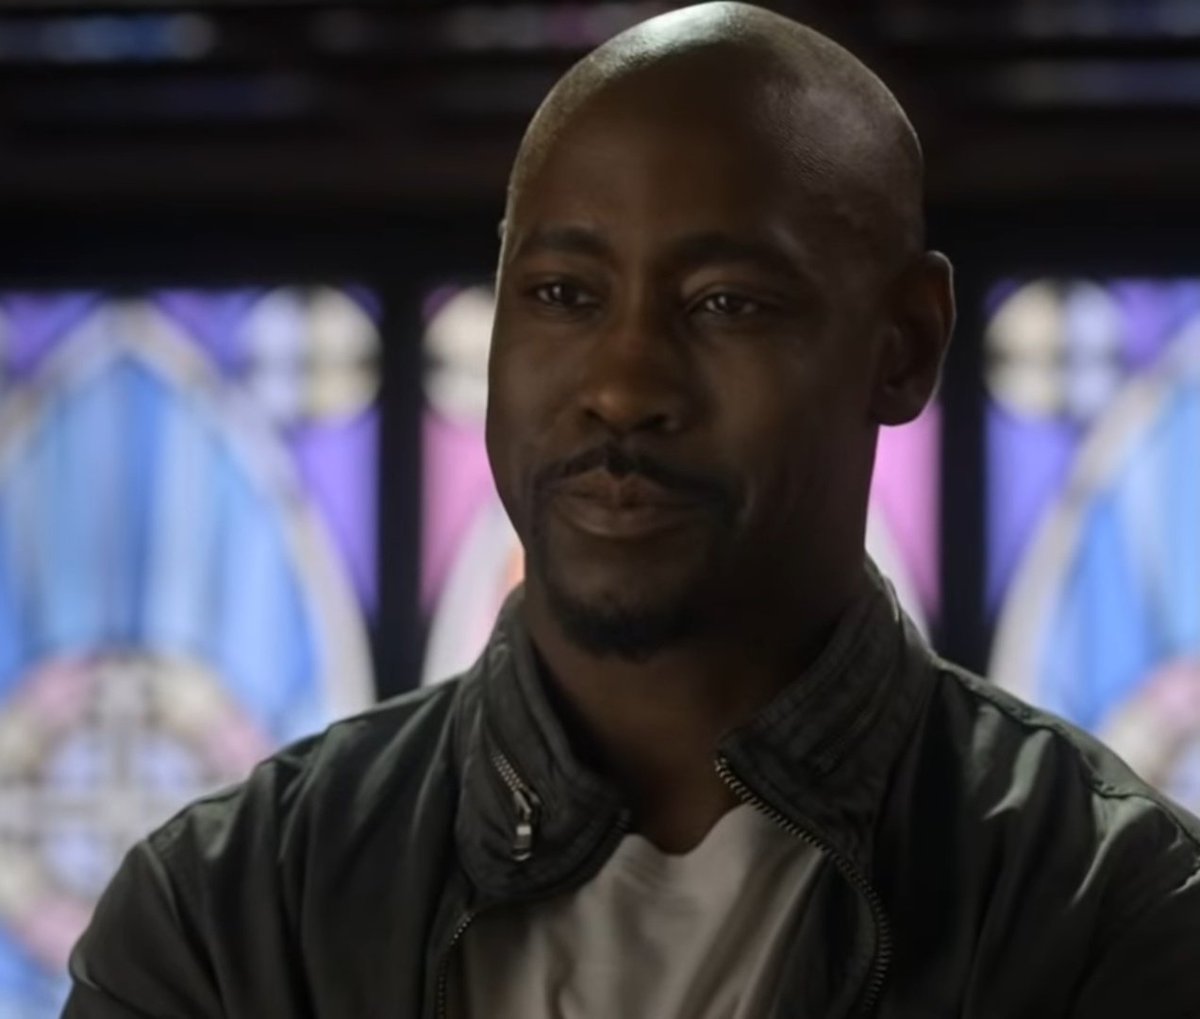 Oct 19thMiracle This scene Amenadiel's words are truly so poignant here"That you are the only mortal who sees him for who he truly is""Your not The gift,That is"